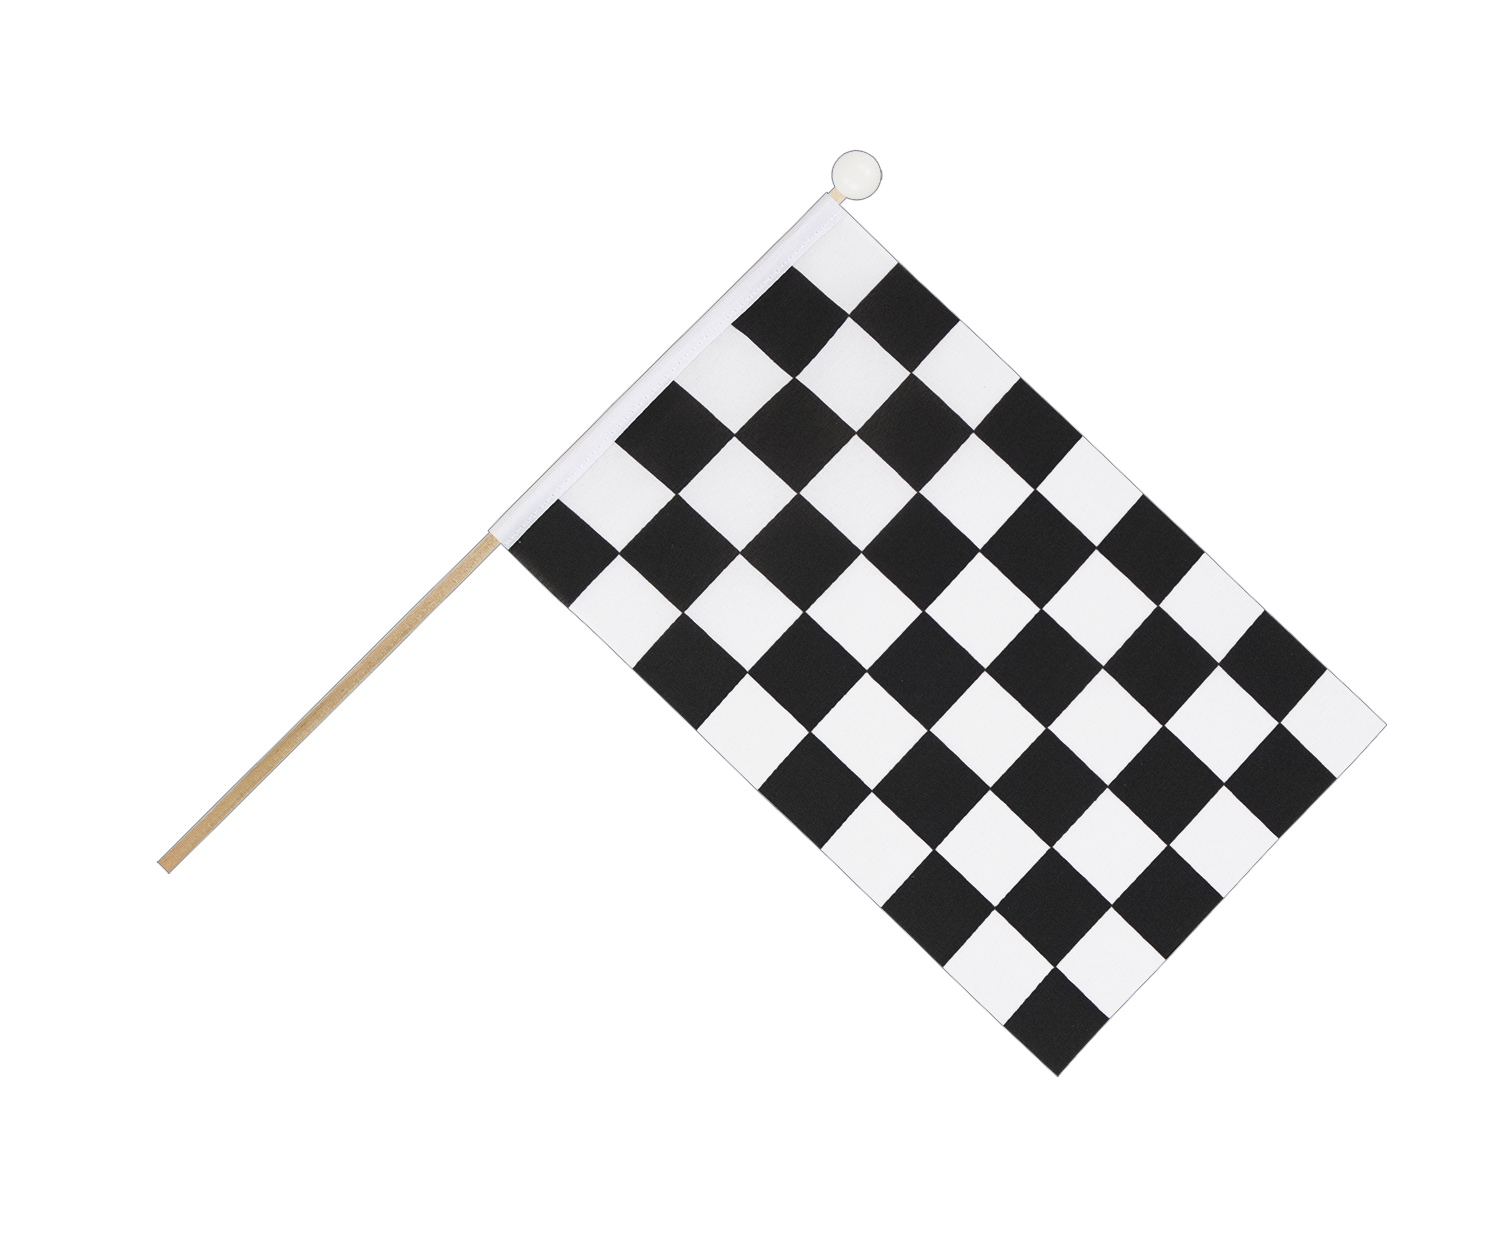 Racing flags Checkerboard Road - checkered flag png download - 1500 ... Repeating Checkered Flag Background